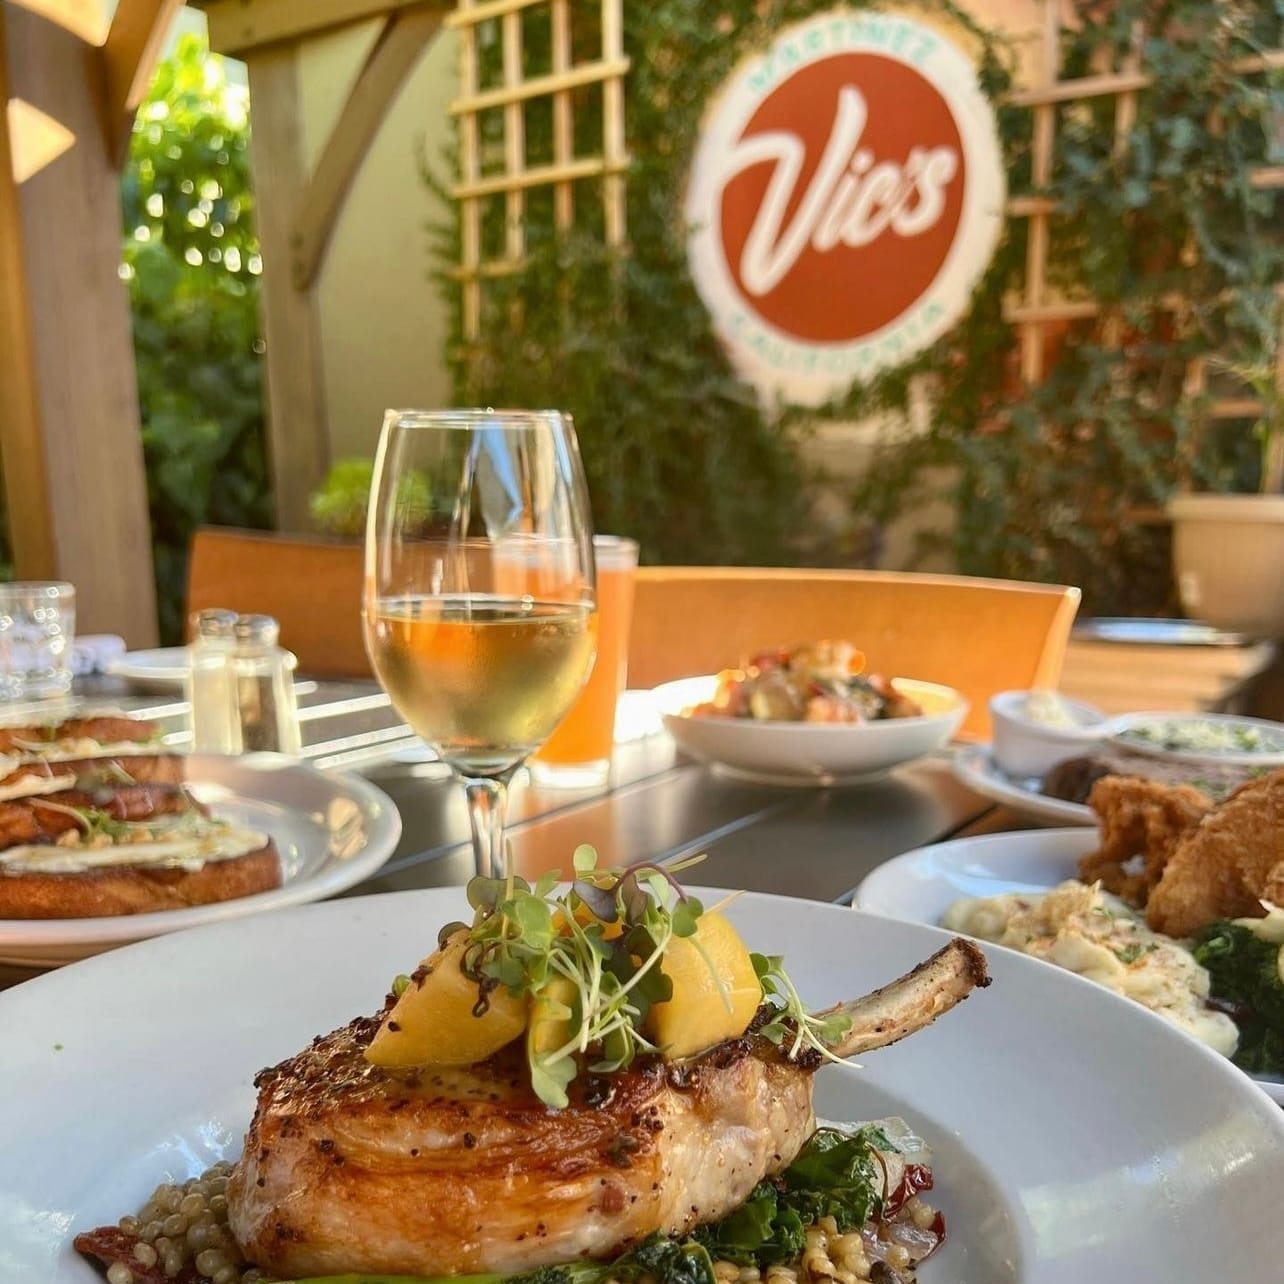 A table at Vic's Martinez with plated food and a glass of white wine